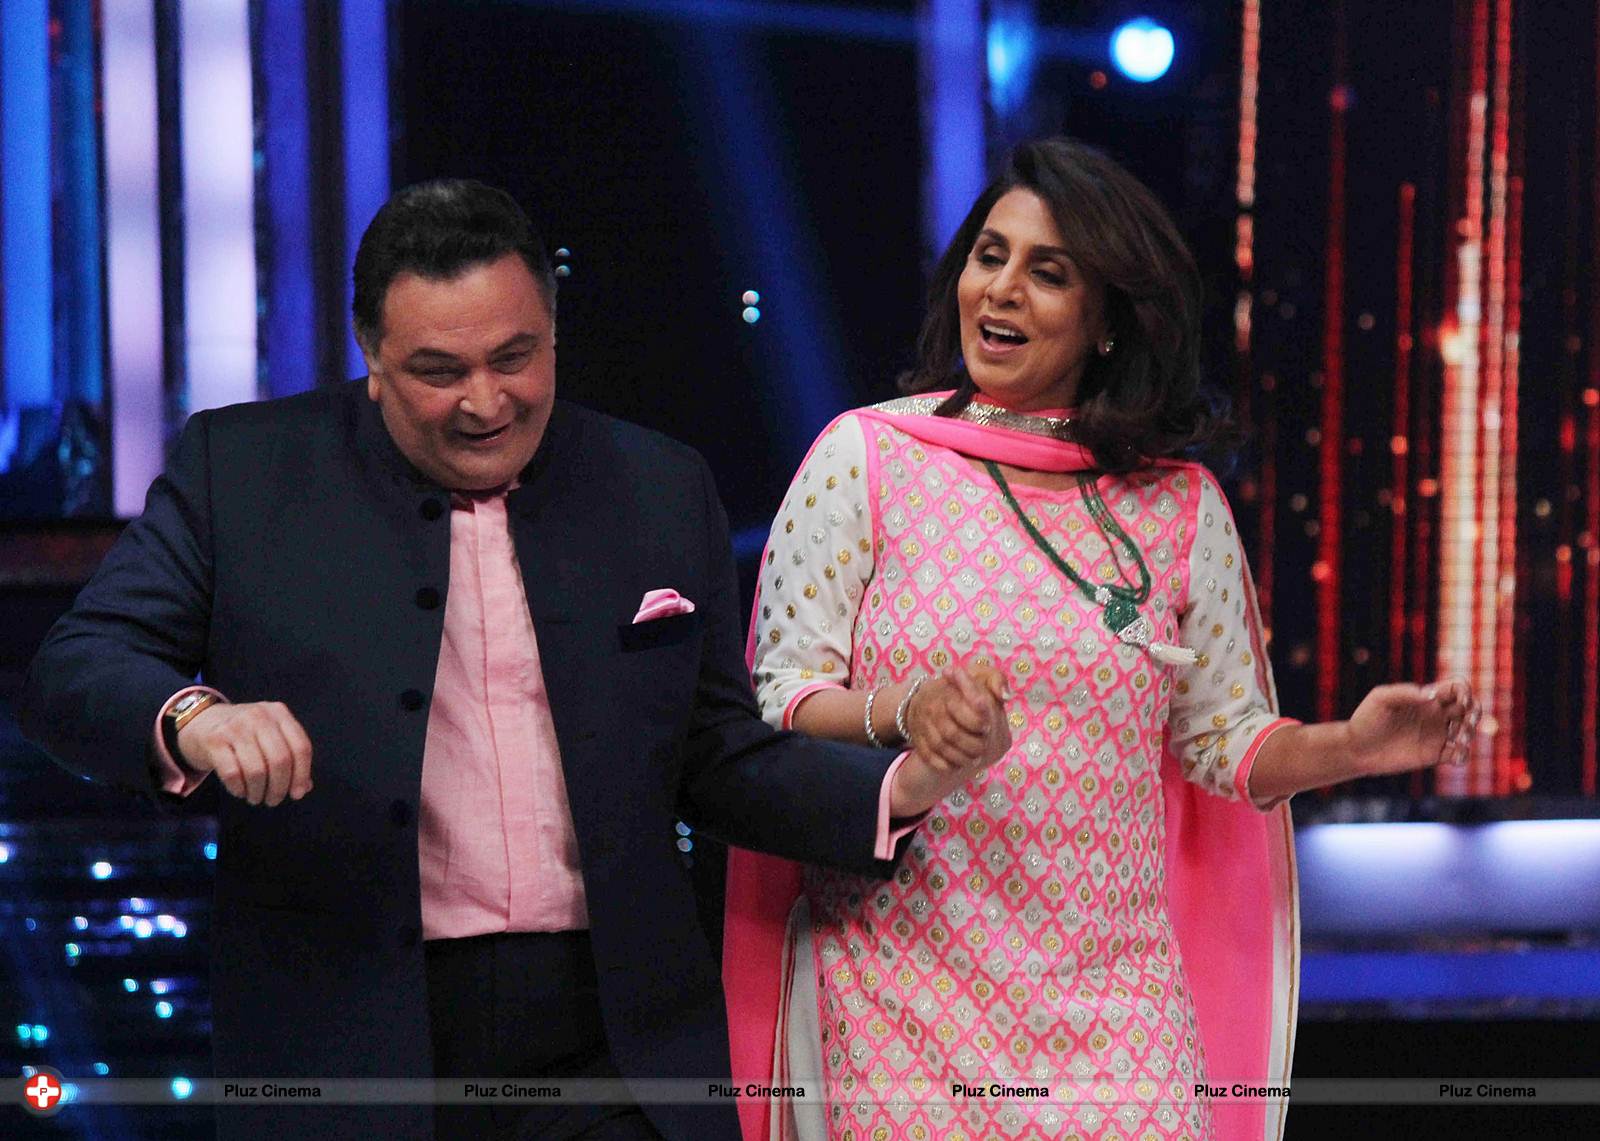 Promotion of Besharam on the sets of Jhalak Dikhhla Jaa Photos | Picture 562967